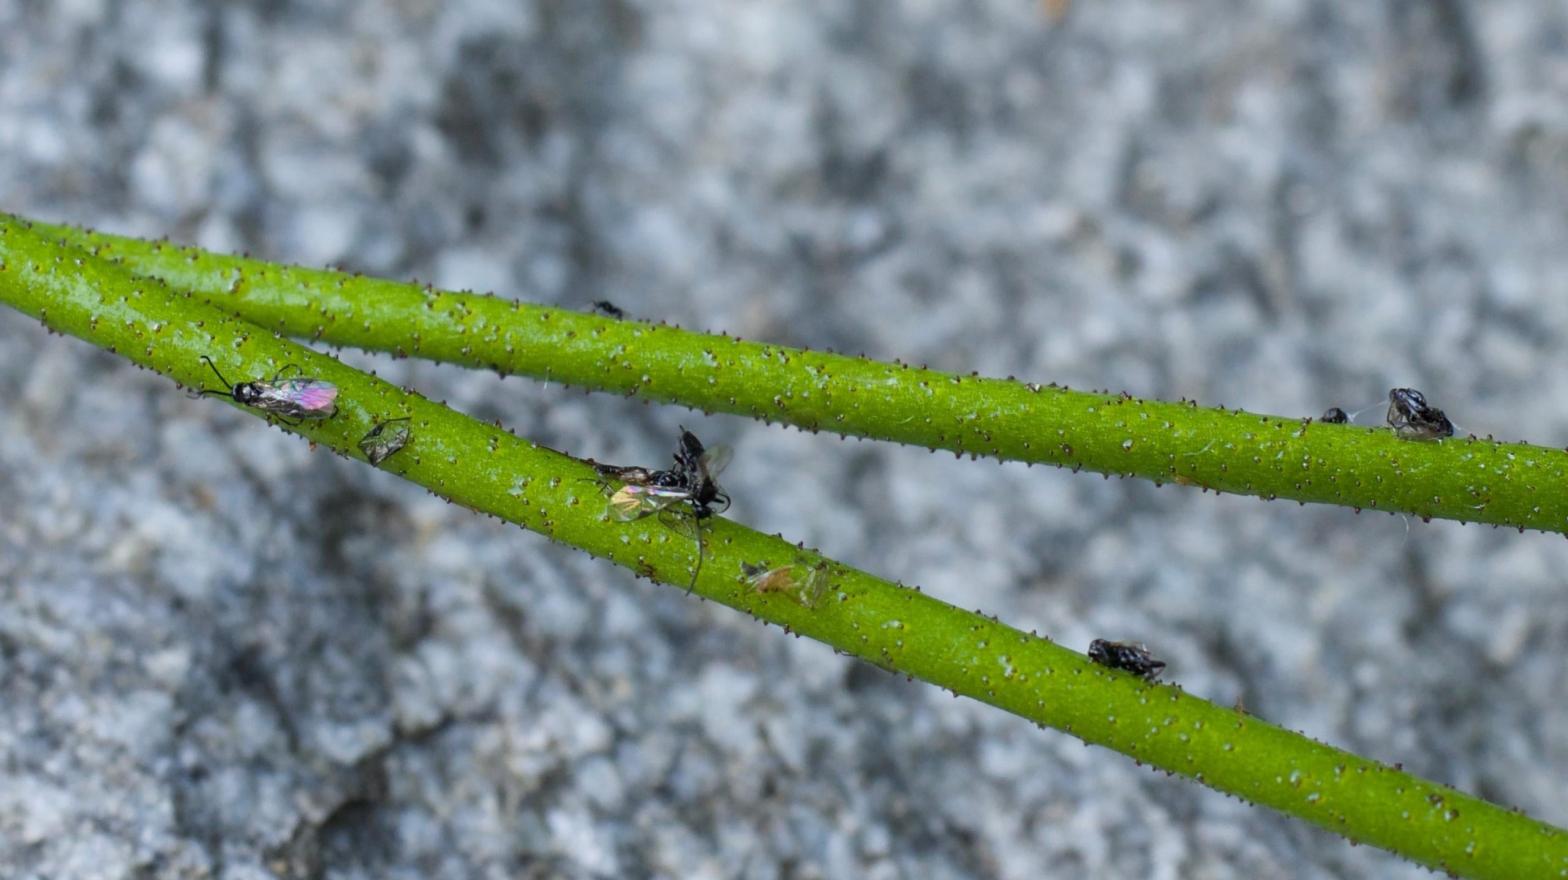 Dead insects stuck to the stem of a carnivorous Triantha occidentalis in North Cascades National Park, Washington. (Photo: Qianshi Lin)